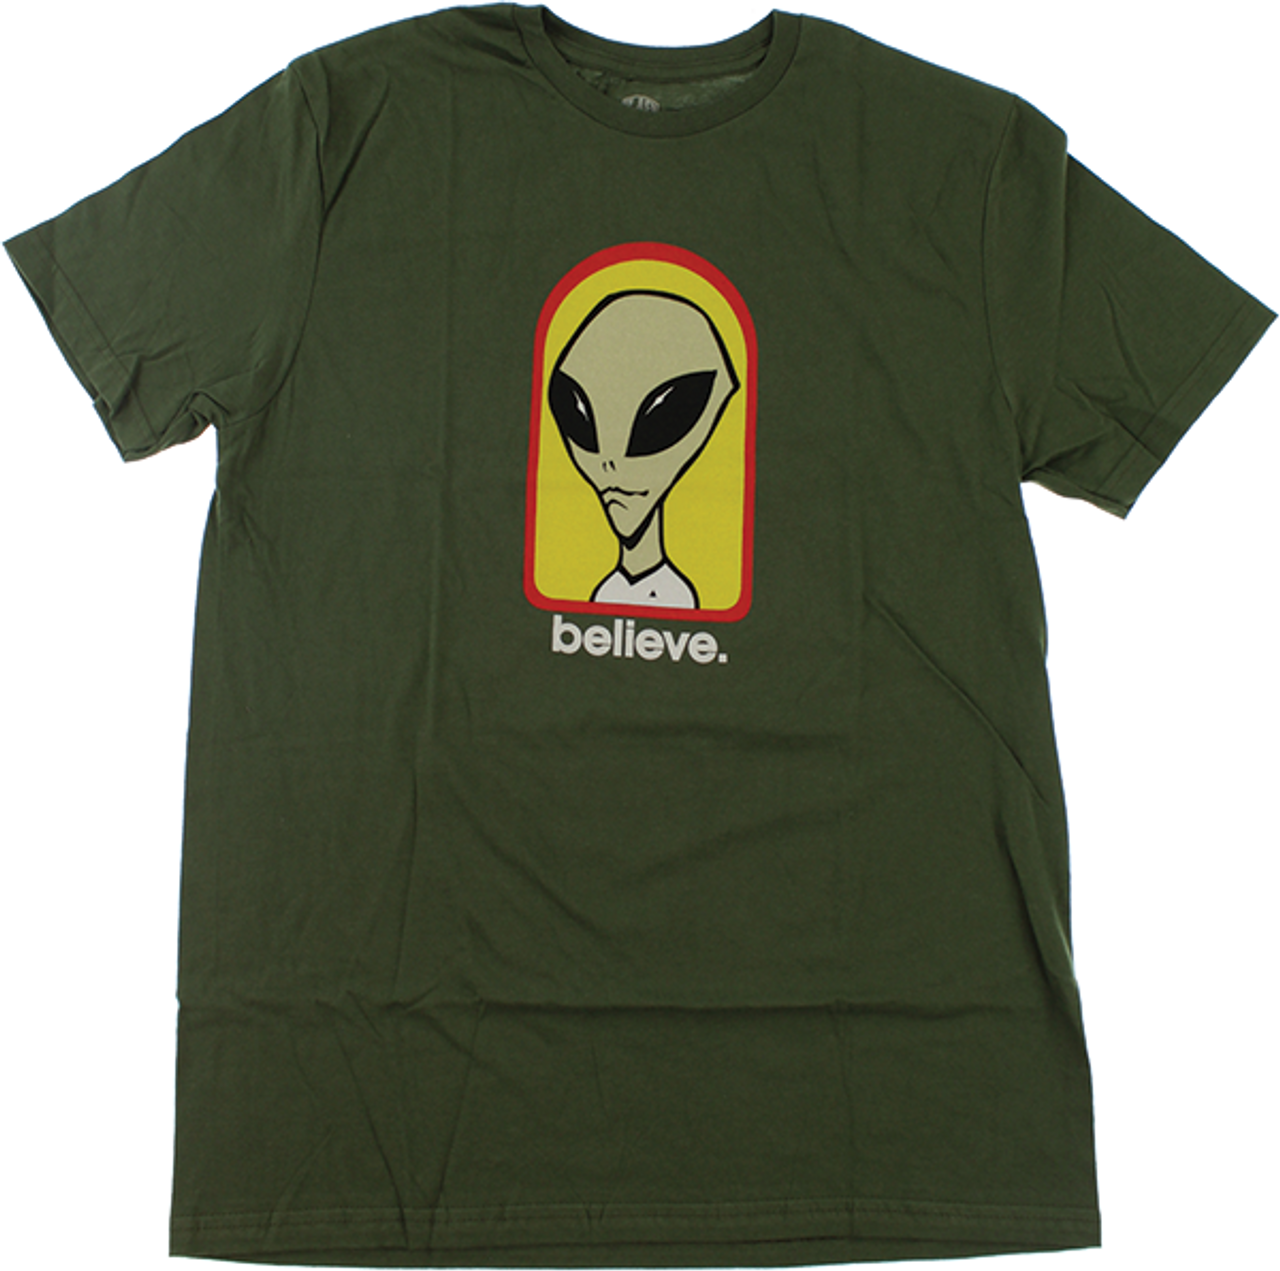 ALIEN WORKSHOP BELIEVE SS TSHIRT SMALL OLIVE/YEL/RED